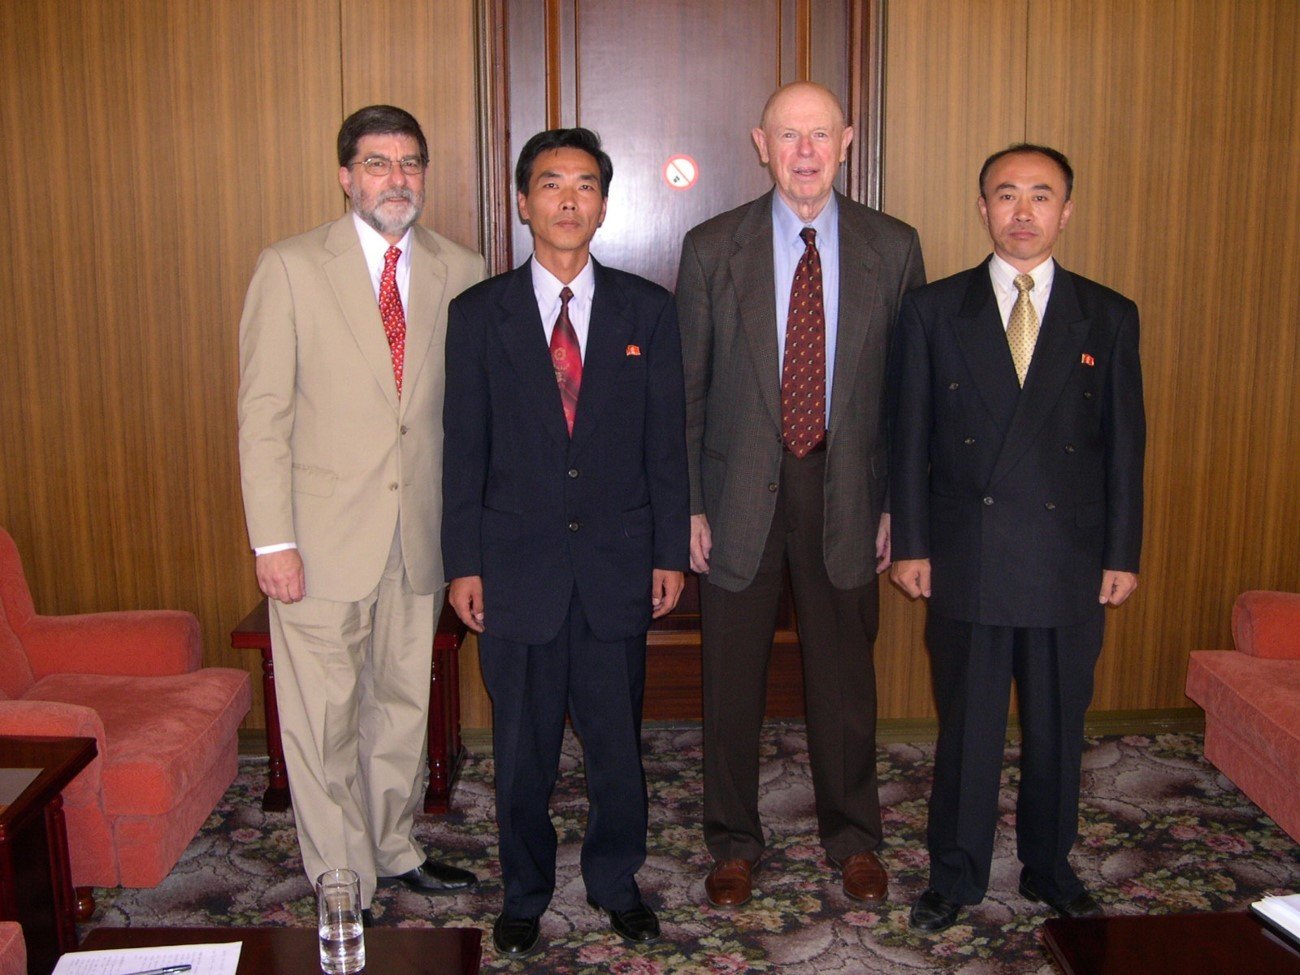 Two Americans and two Koreans in suits and tie posing for a photo in a carpeted room with soft furniture